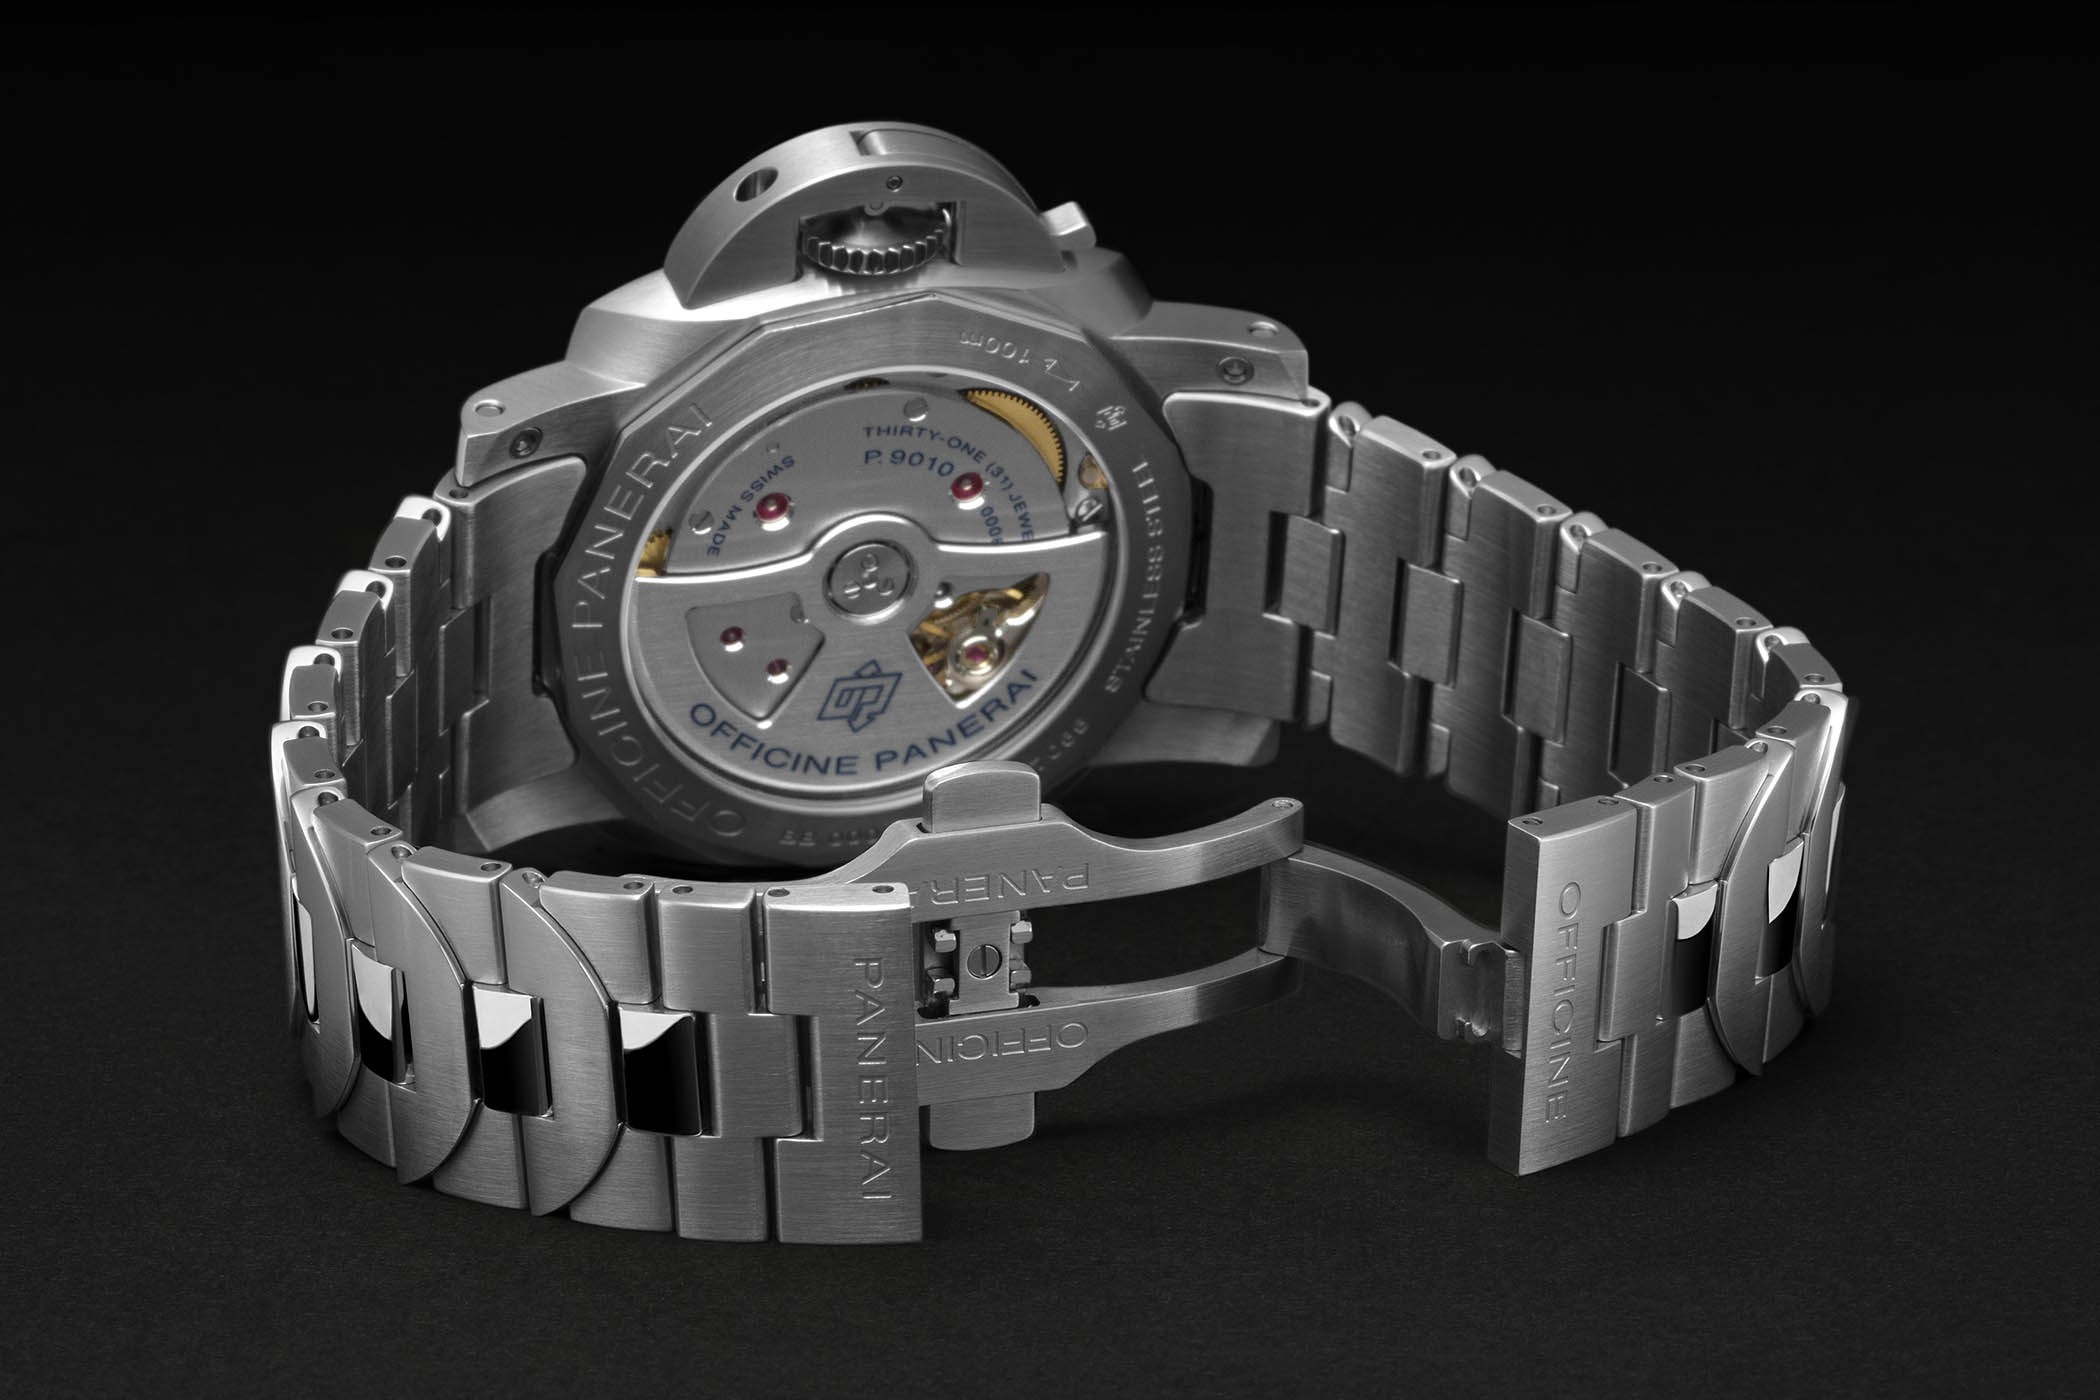 The silver dial and steel case make this Panerai pure and elegant.